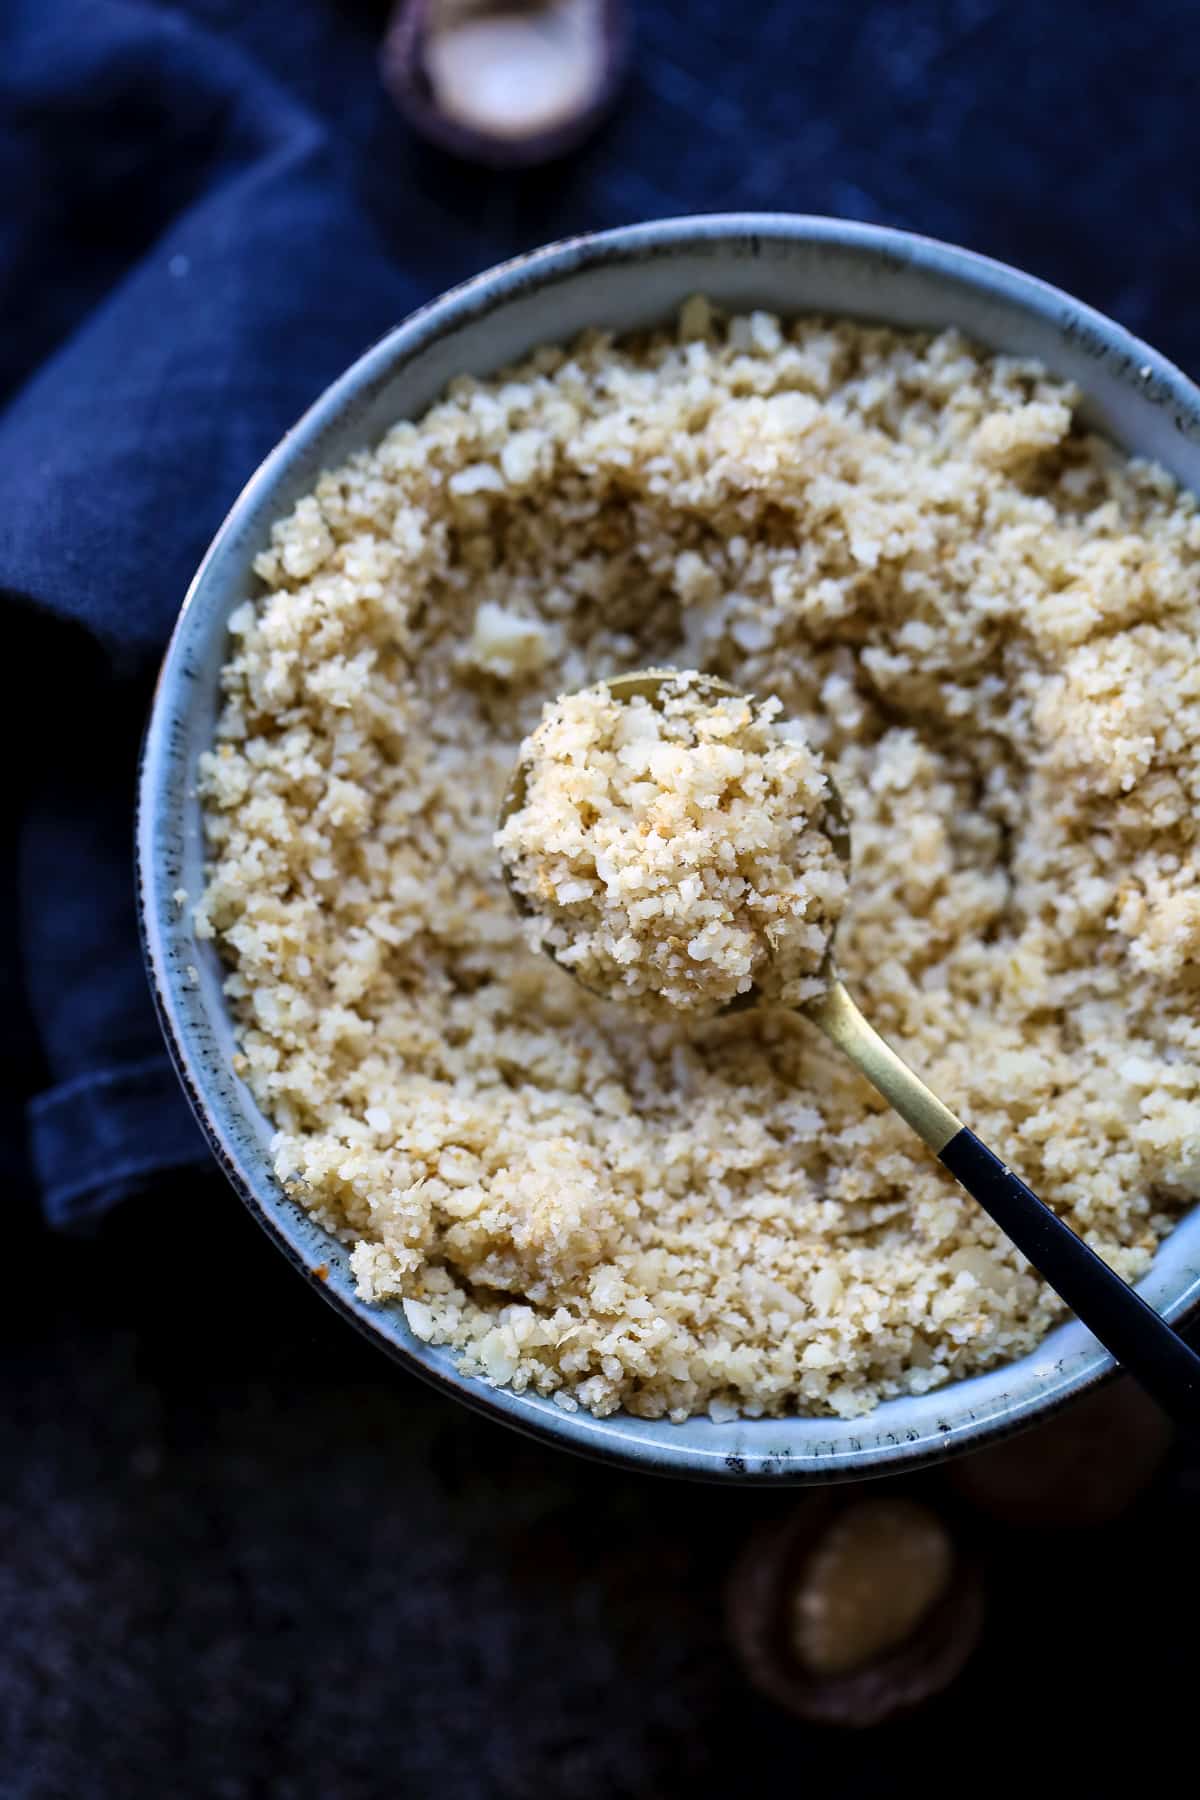 A Spoonful of Vegan Parmesan Cheese.